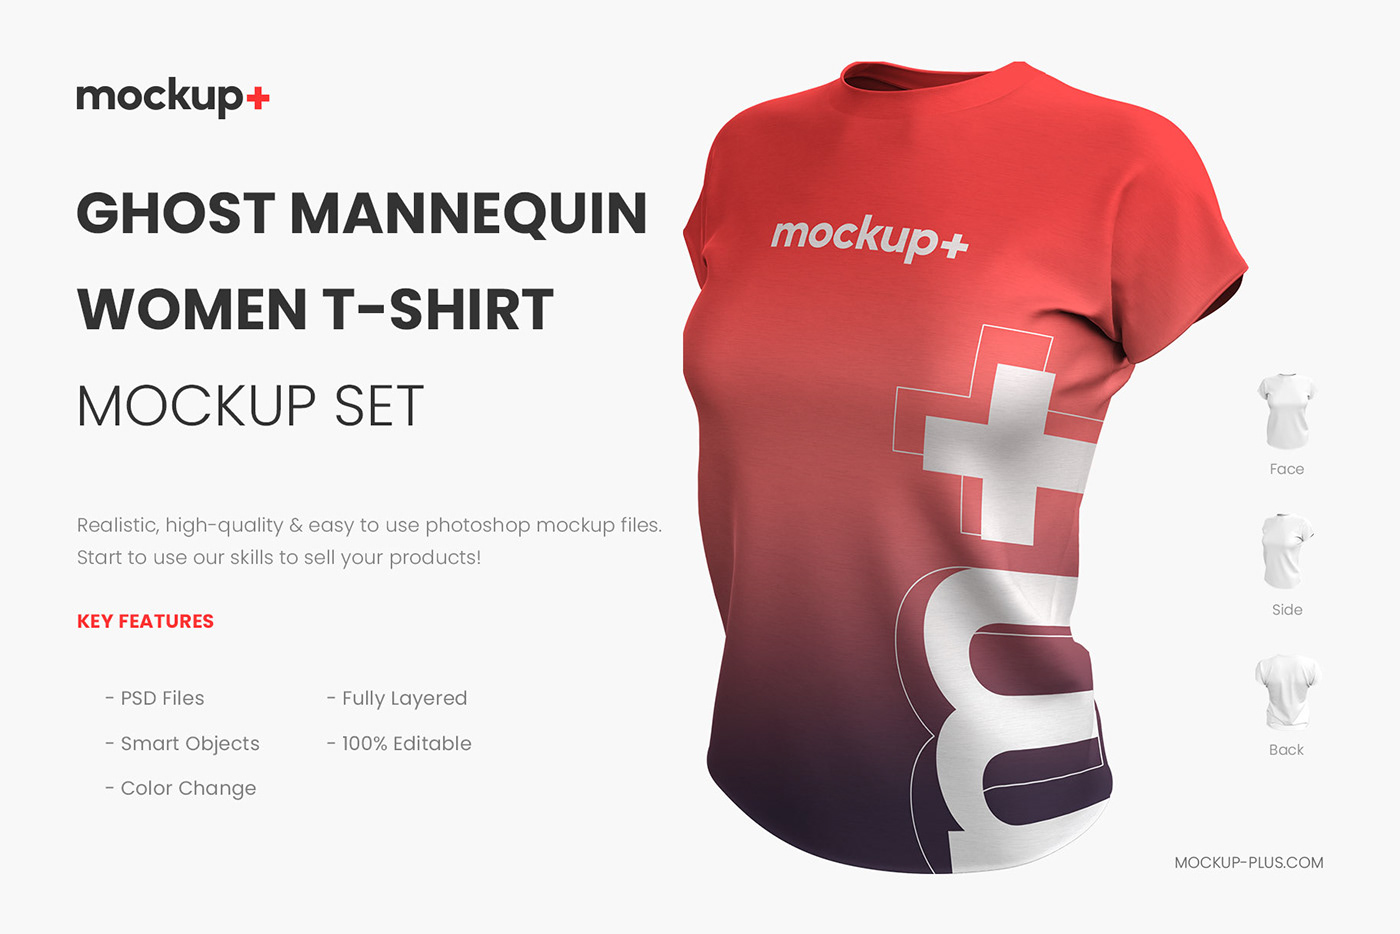 ghost mannequin women t-shirt Mockup face back side high quality female